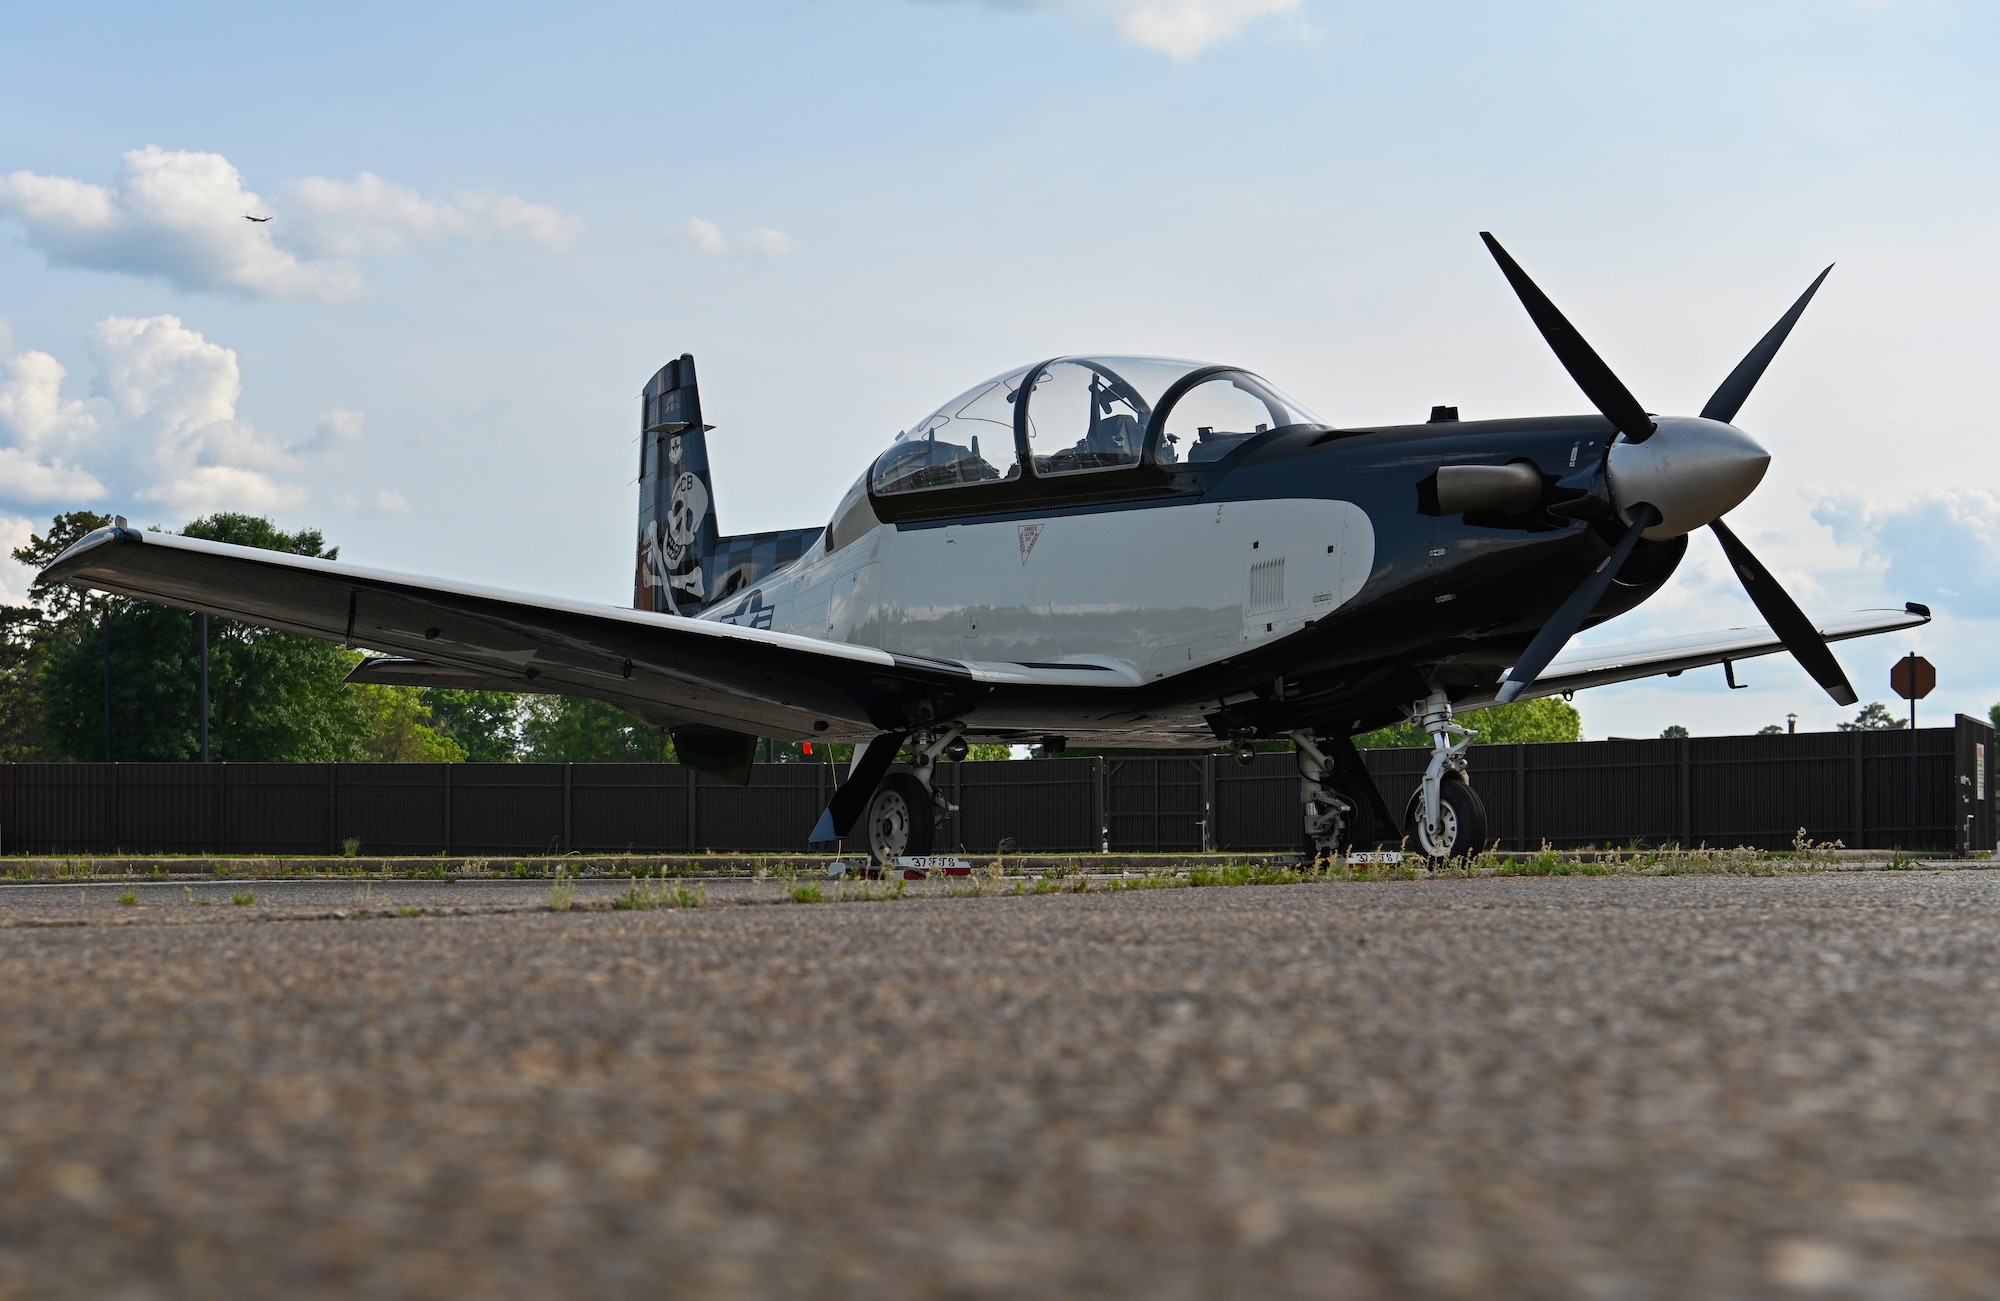 The newly added First Assignment Instructor Pilot (FAIP) heritage T-6A Texan II sits on the flightline for a static display on May 13, 2022, at Columbus Air Force Base, Miss. The T-6 is a single-engine, two-seat primary trainer designed to train Undergraduate Pilot Training, or UPT, students in basic flying skills common to U.S. Air Force and Navy pilots. (U.S. Air Force photo by Senior Airman Davis Donaldson)